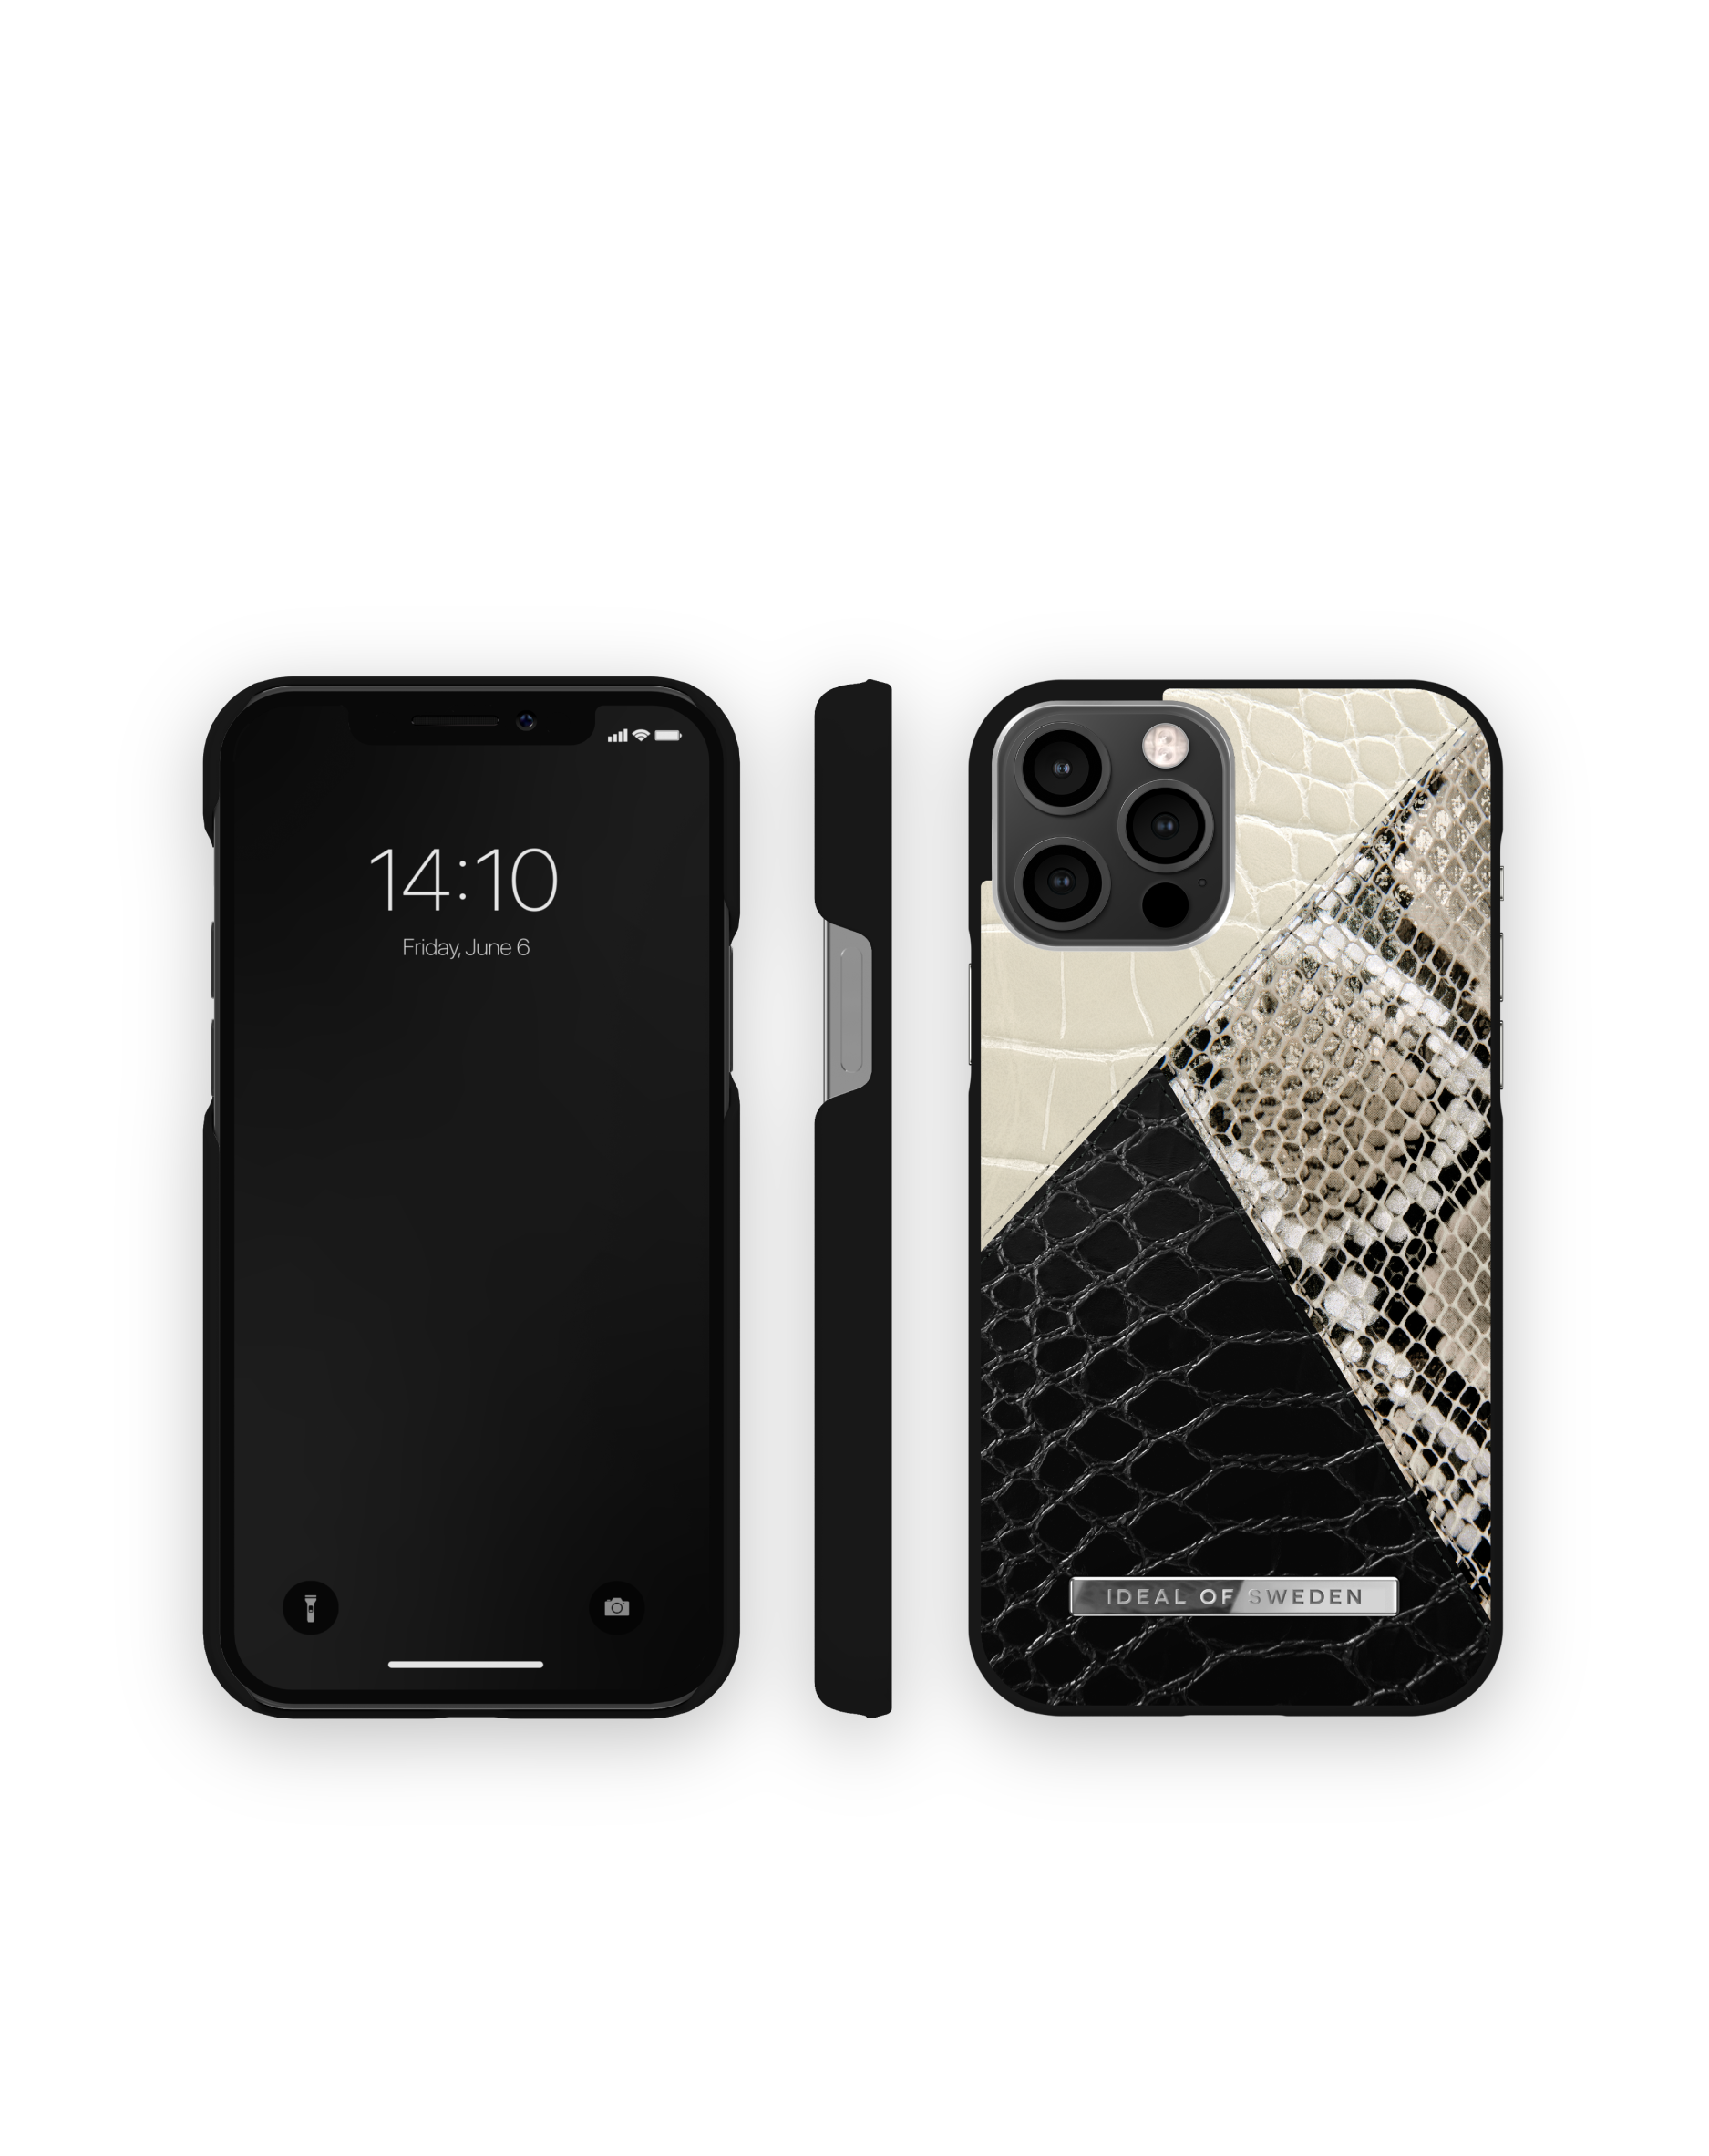 IDEAL OF Backcover, iPhone Apple SWEDEN Apple, Pro, Apple iPhone Sky 12 IDACSS21-I2061-271, 12, Night Snake